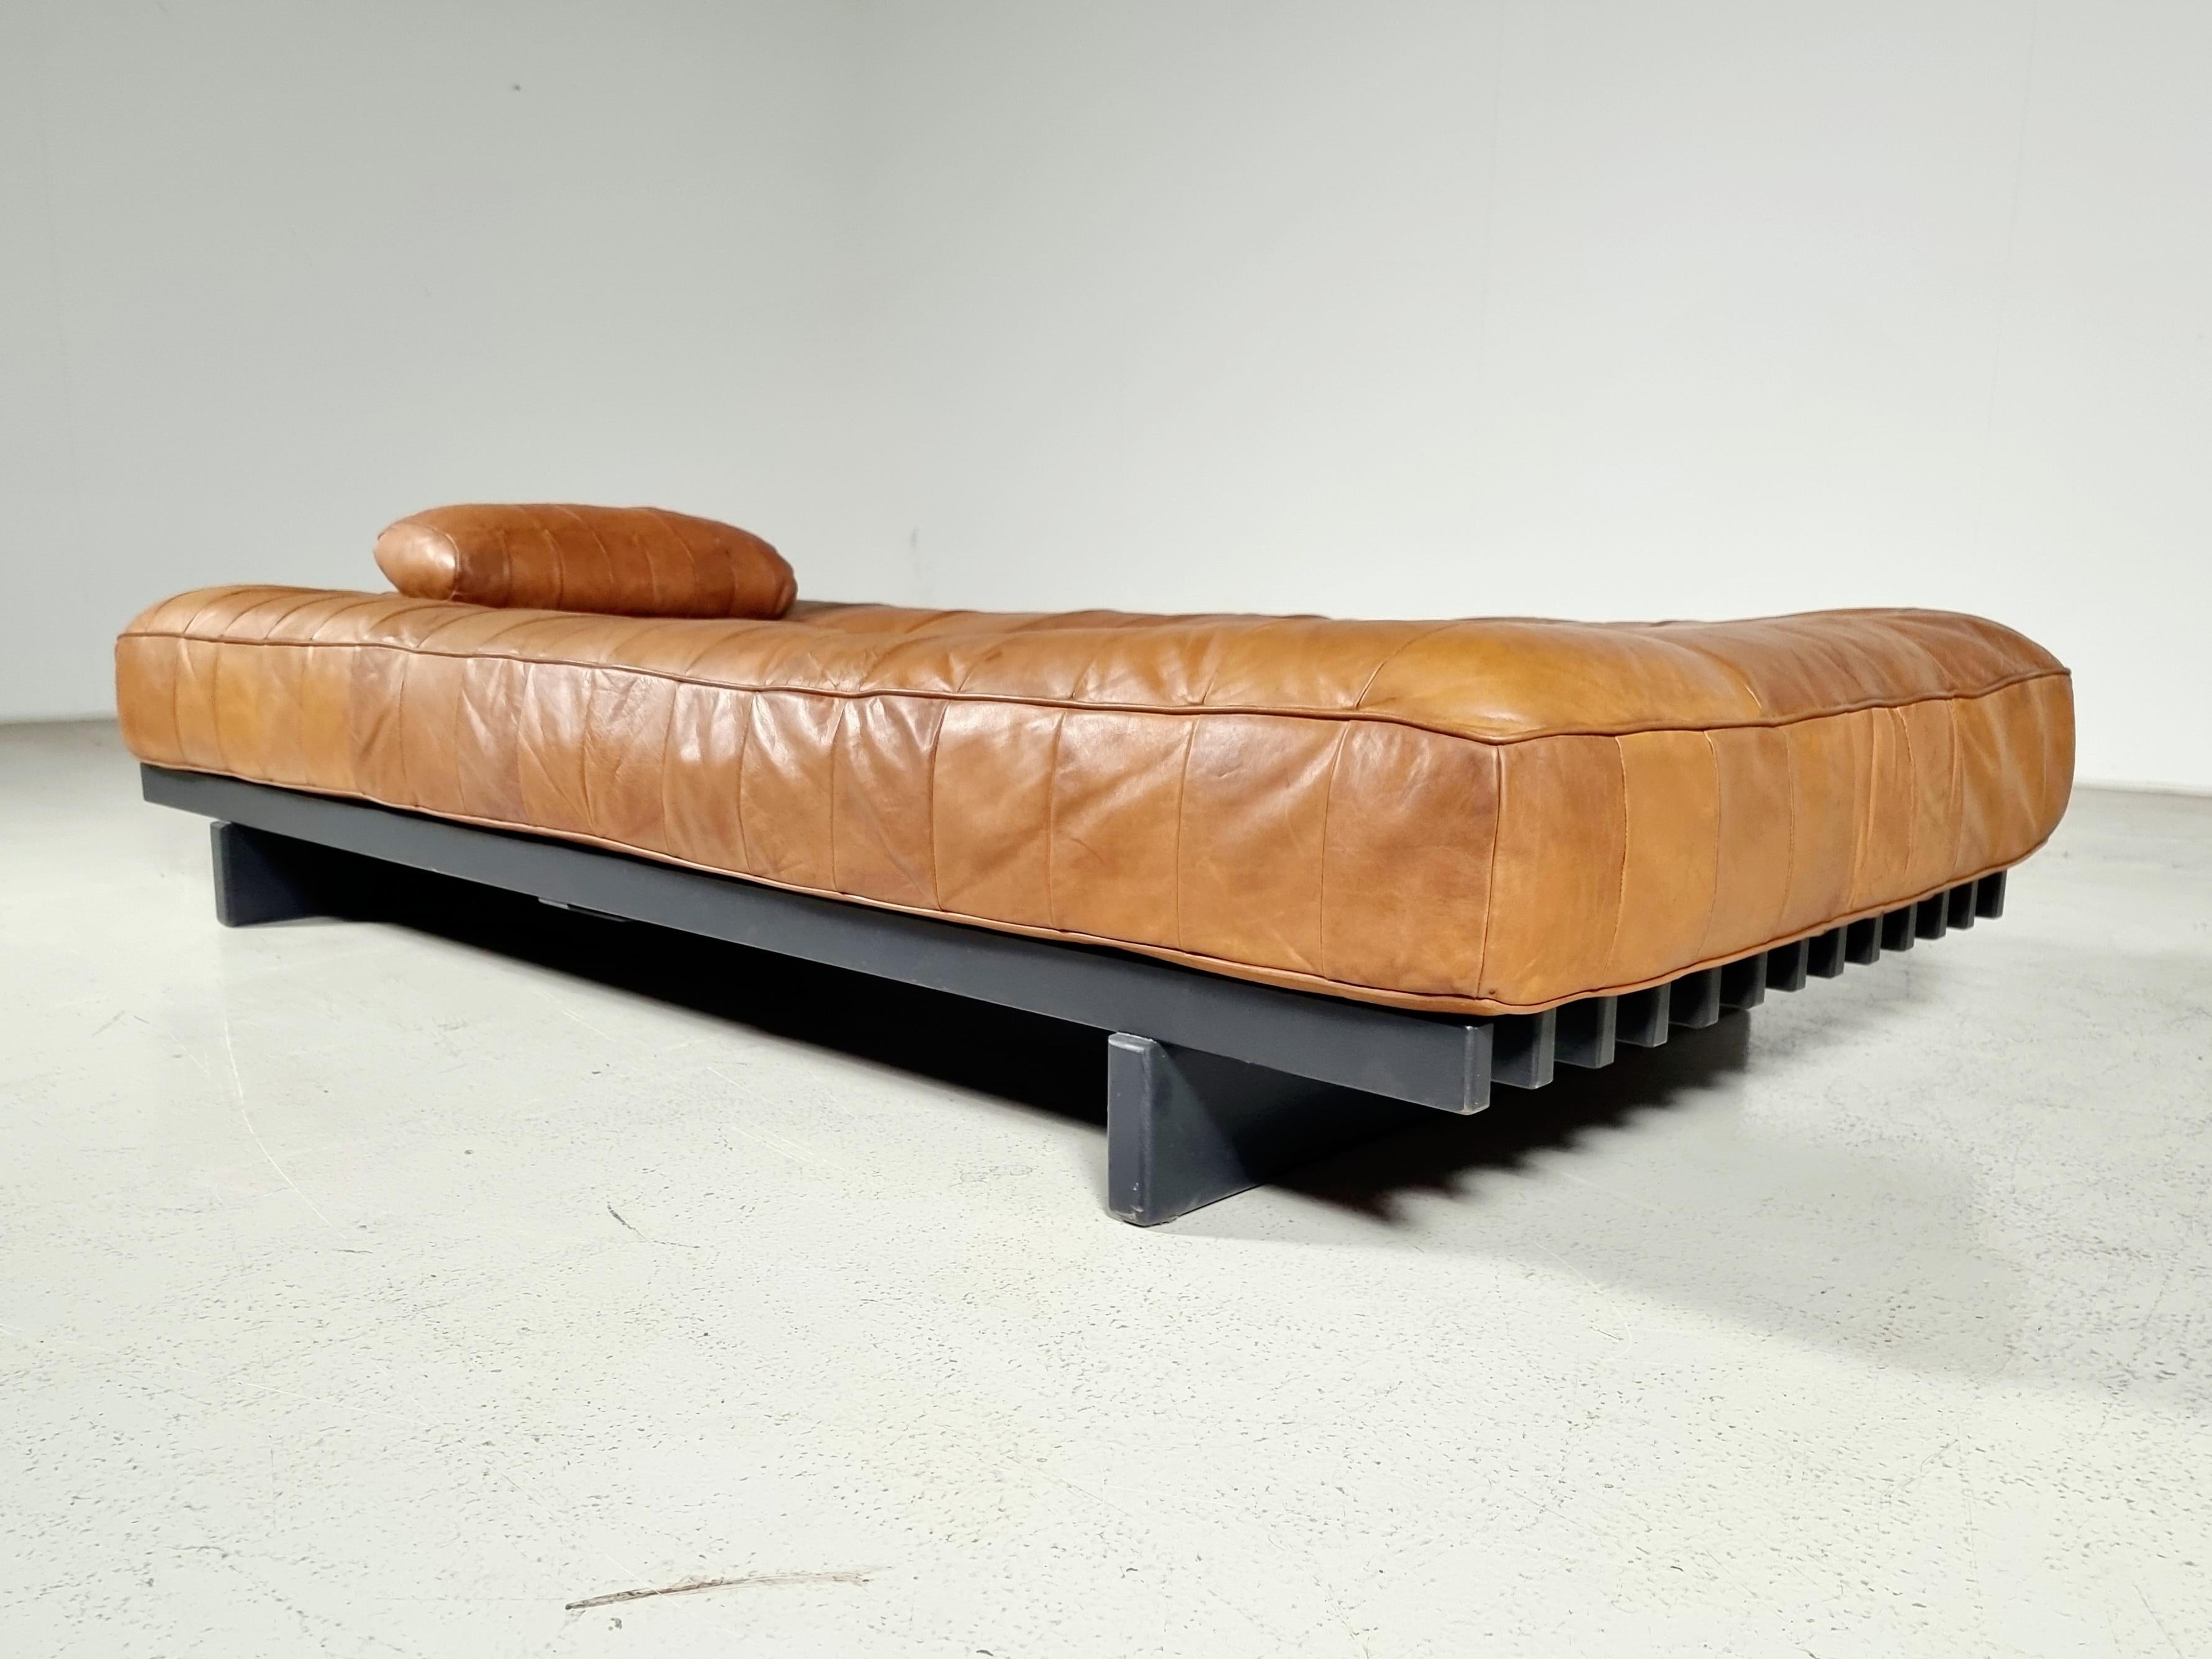 De Sede DS80 cognac leather patchwork daybed, Switzerland, 1970. Originally upholstered in beautiful and soft aniline leather. The patchwork design of the daybed results in a slightly non-regular pattern of different shades of cognac colors.
   